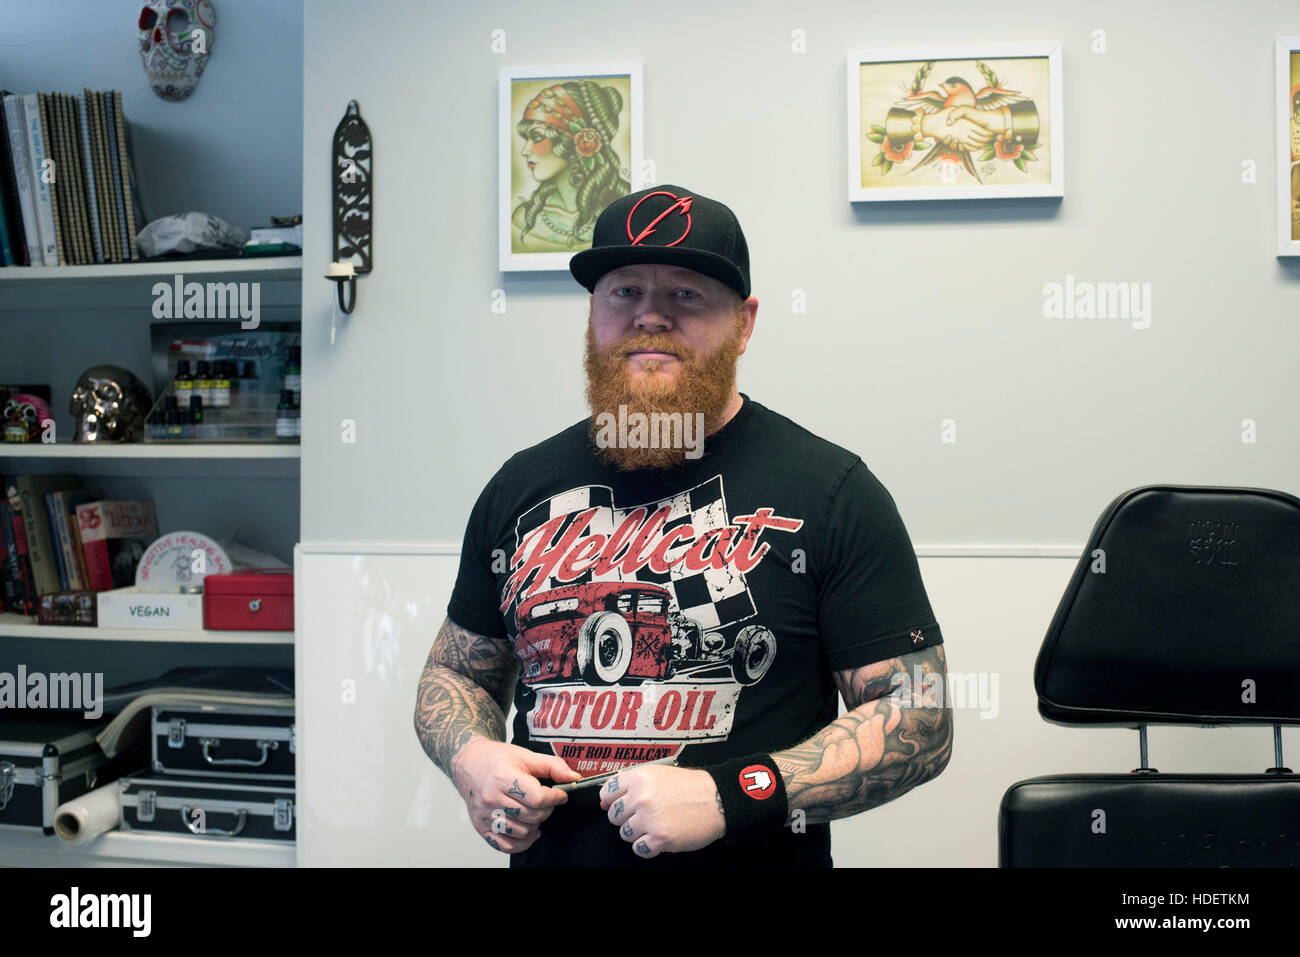 Caerphilly, Wales. November 2016. Lucky 7 - Tattoo Parlour. Owner and tattooist Steve O Davis, photographed in his tattoo shop. © Gemz Ali - Freelance Stock Photo